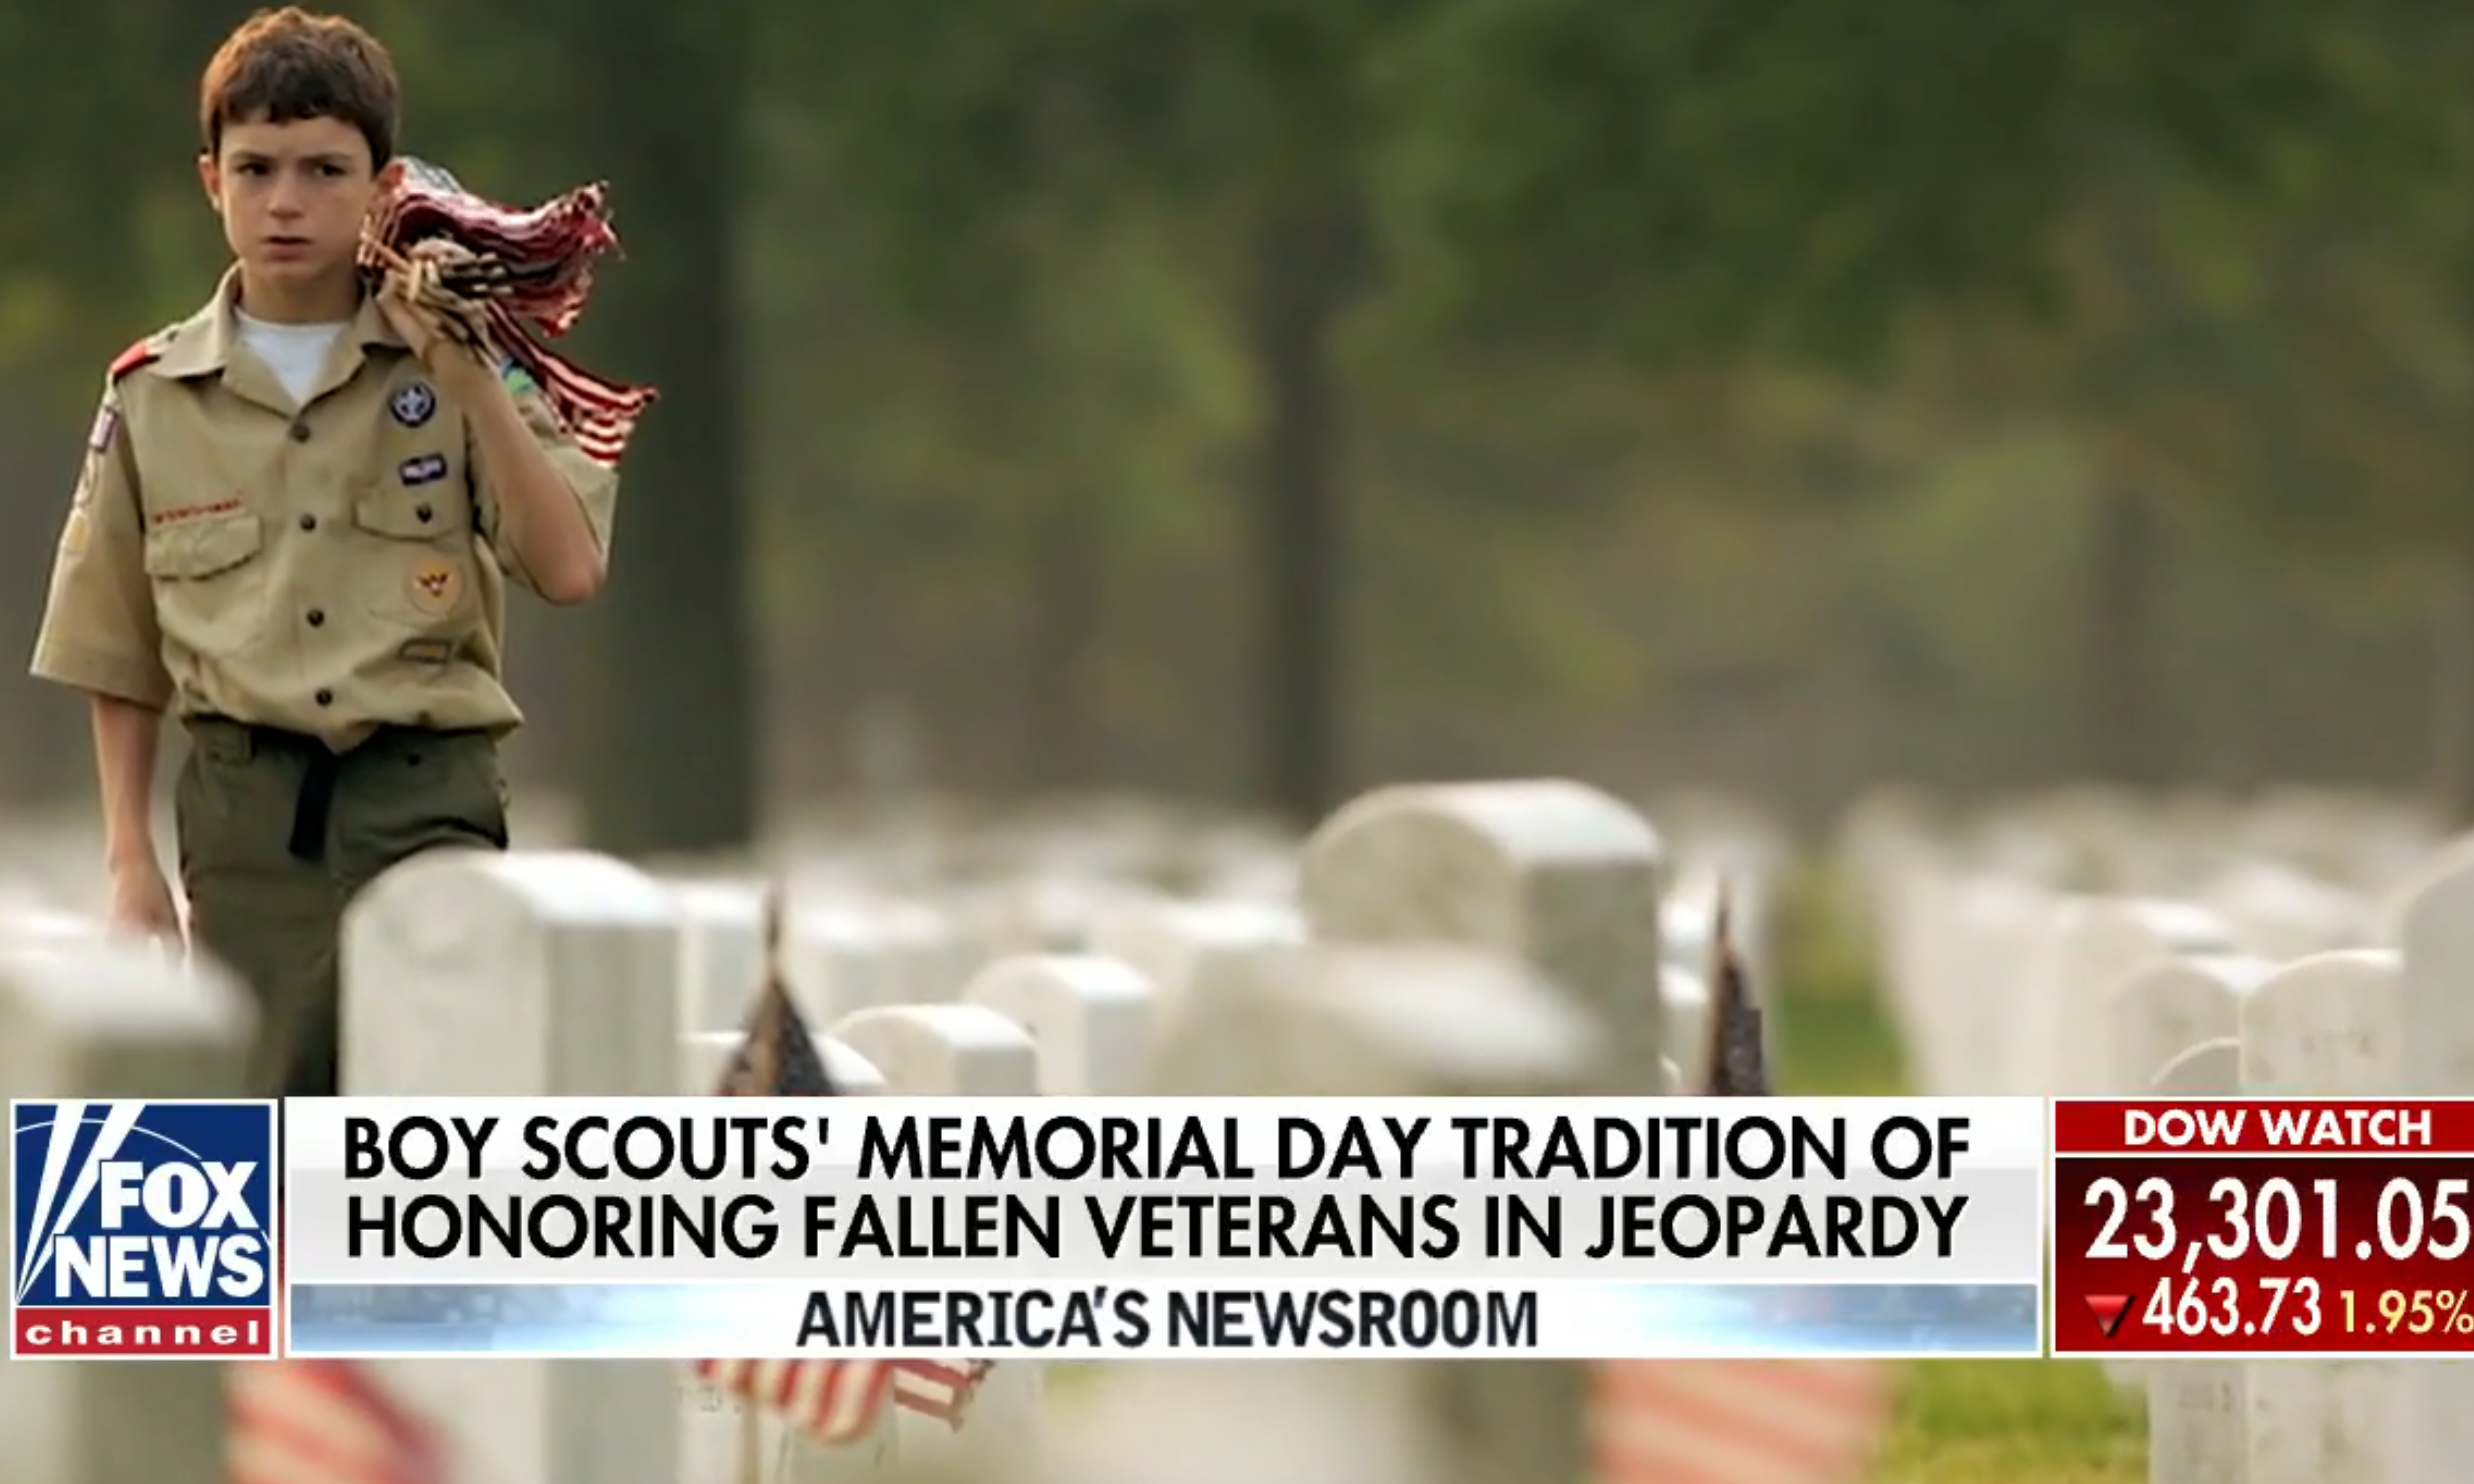 Boy Scouts banned from planting flags on veterans’ graves for Memorial Day